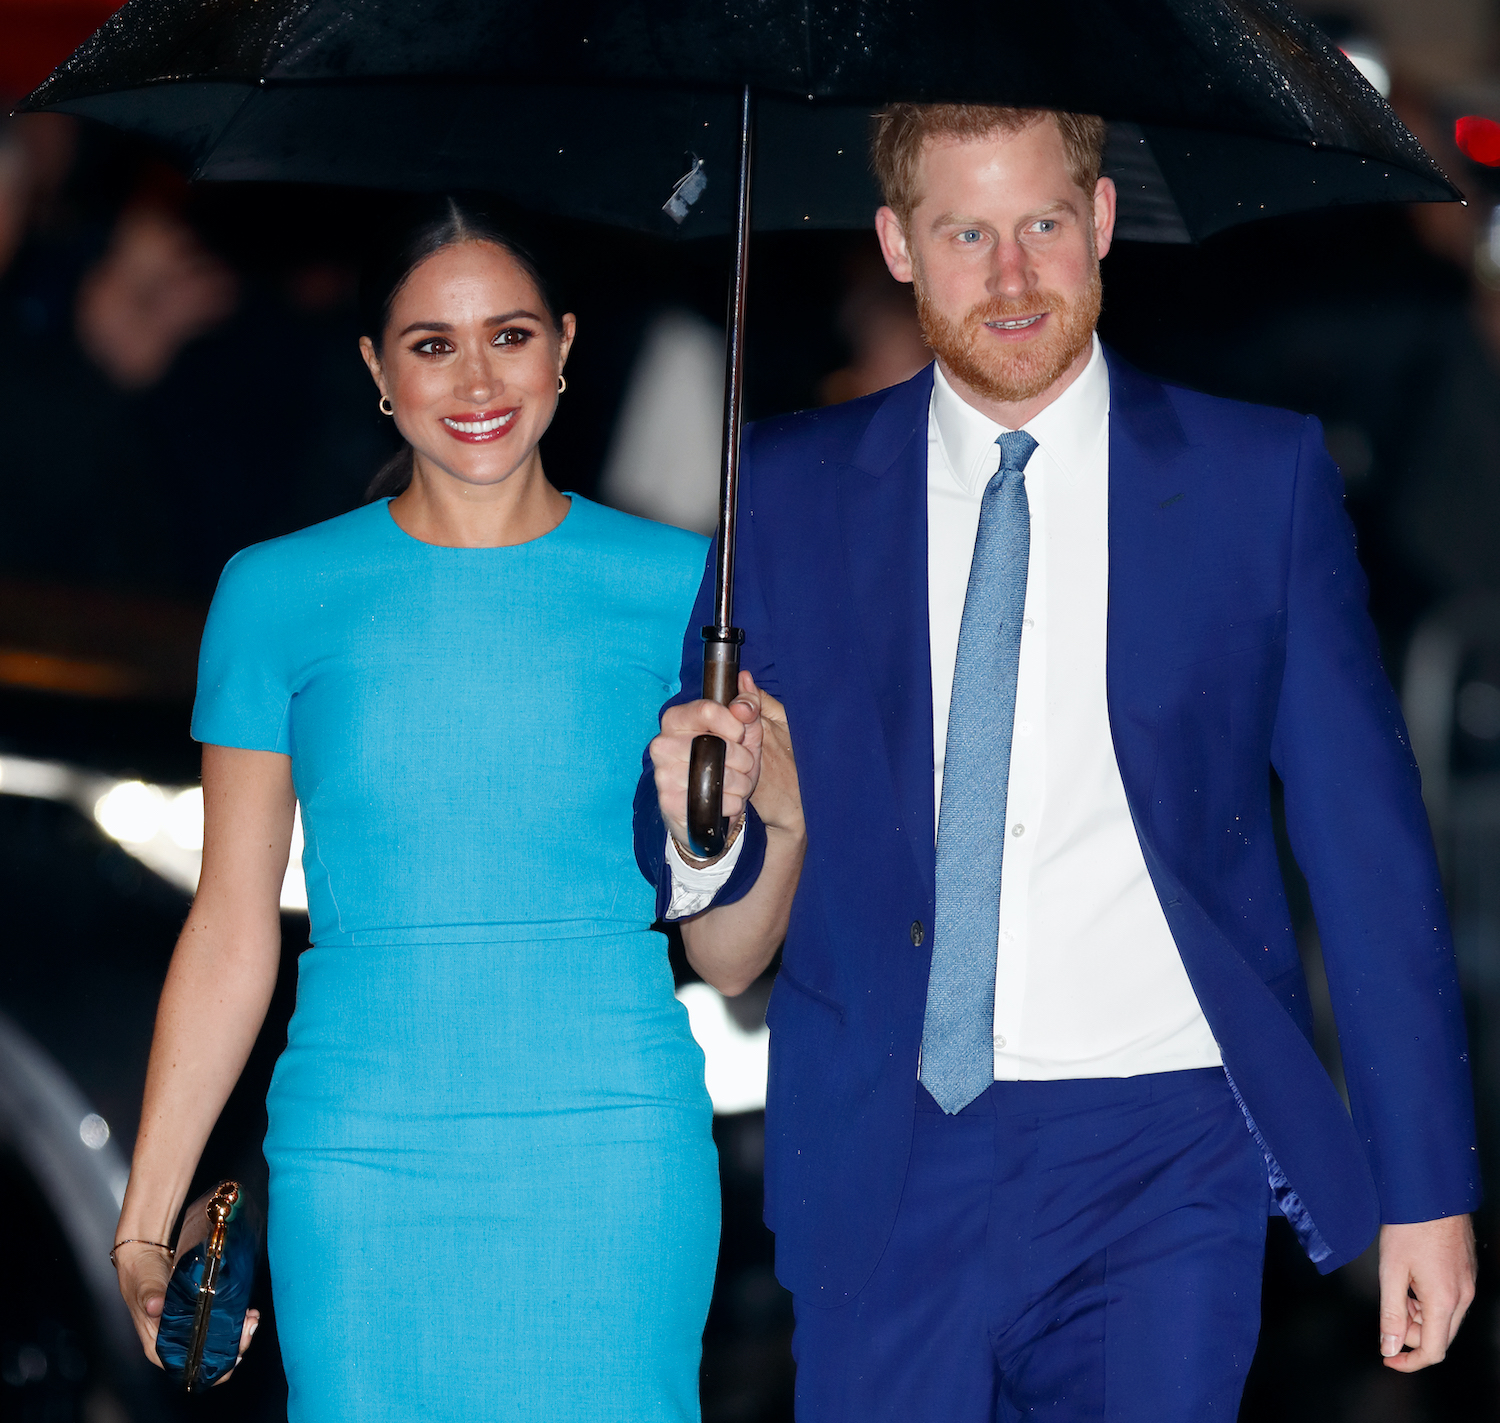 Meghan Markle and Prince Harry attend the 2020 Endeavour Fund Awards 